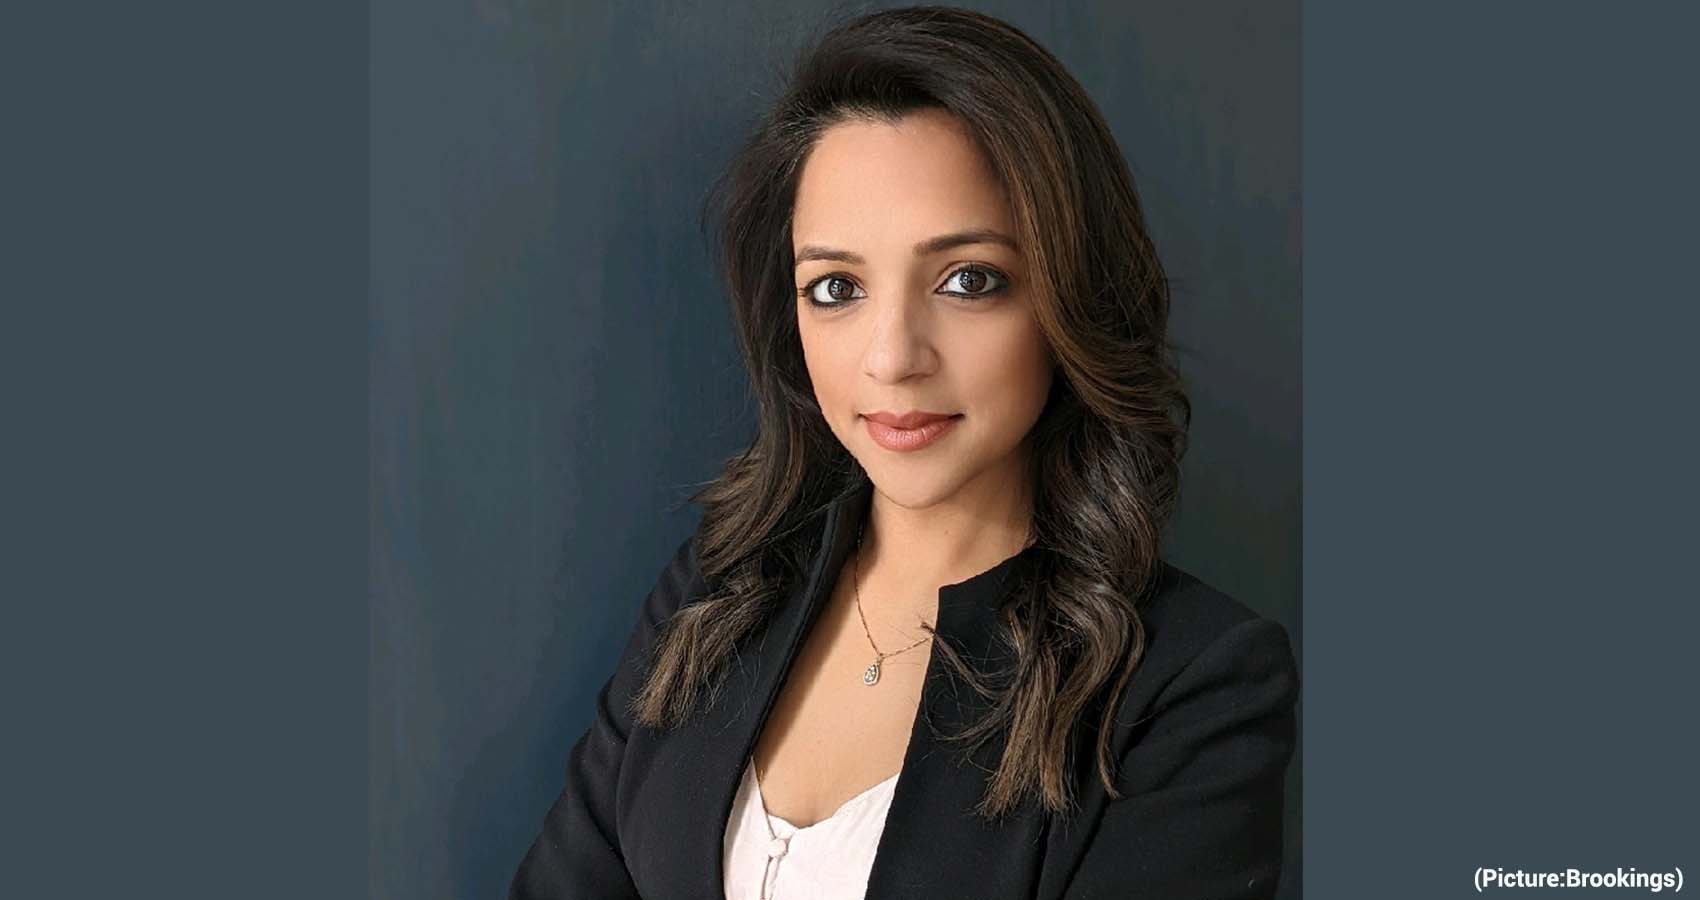 Indian American Woman To Serve As Judge In New Jersey Municipal Court